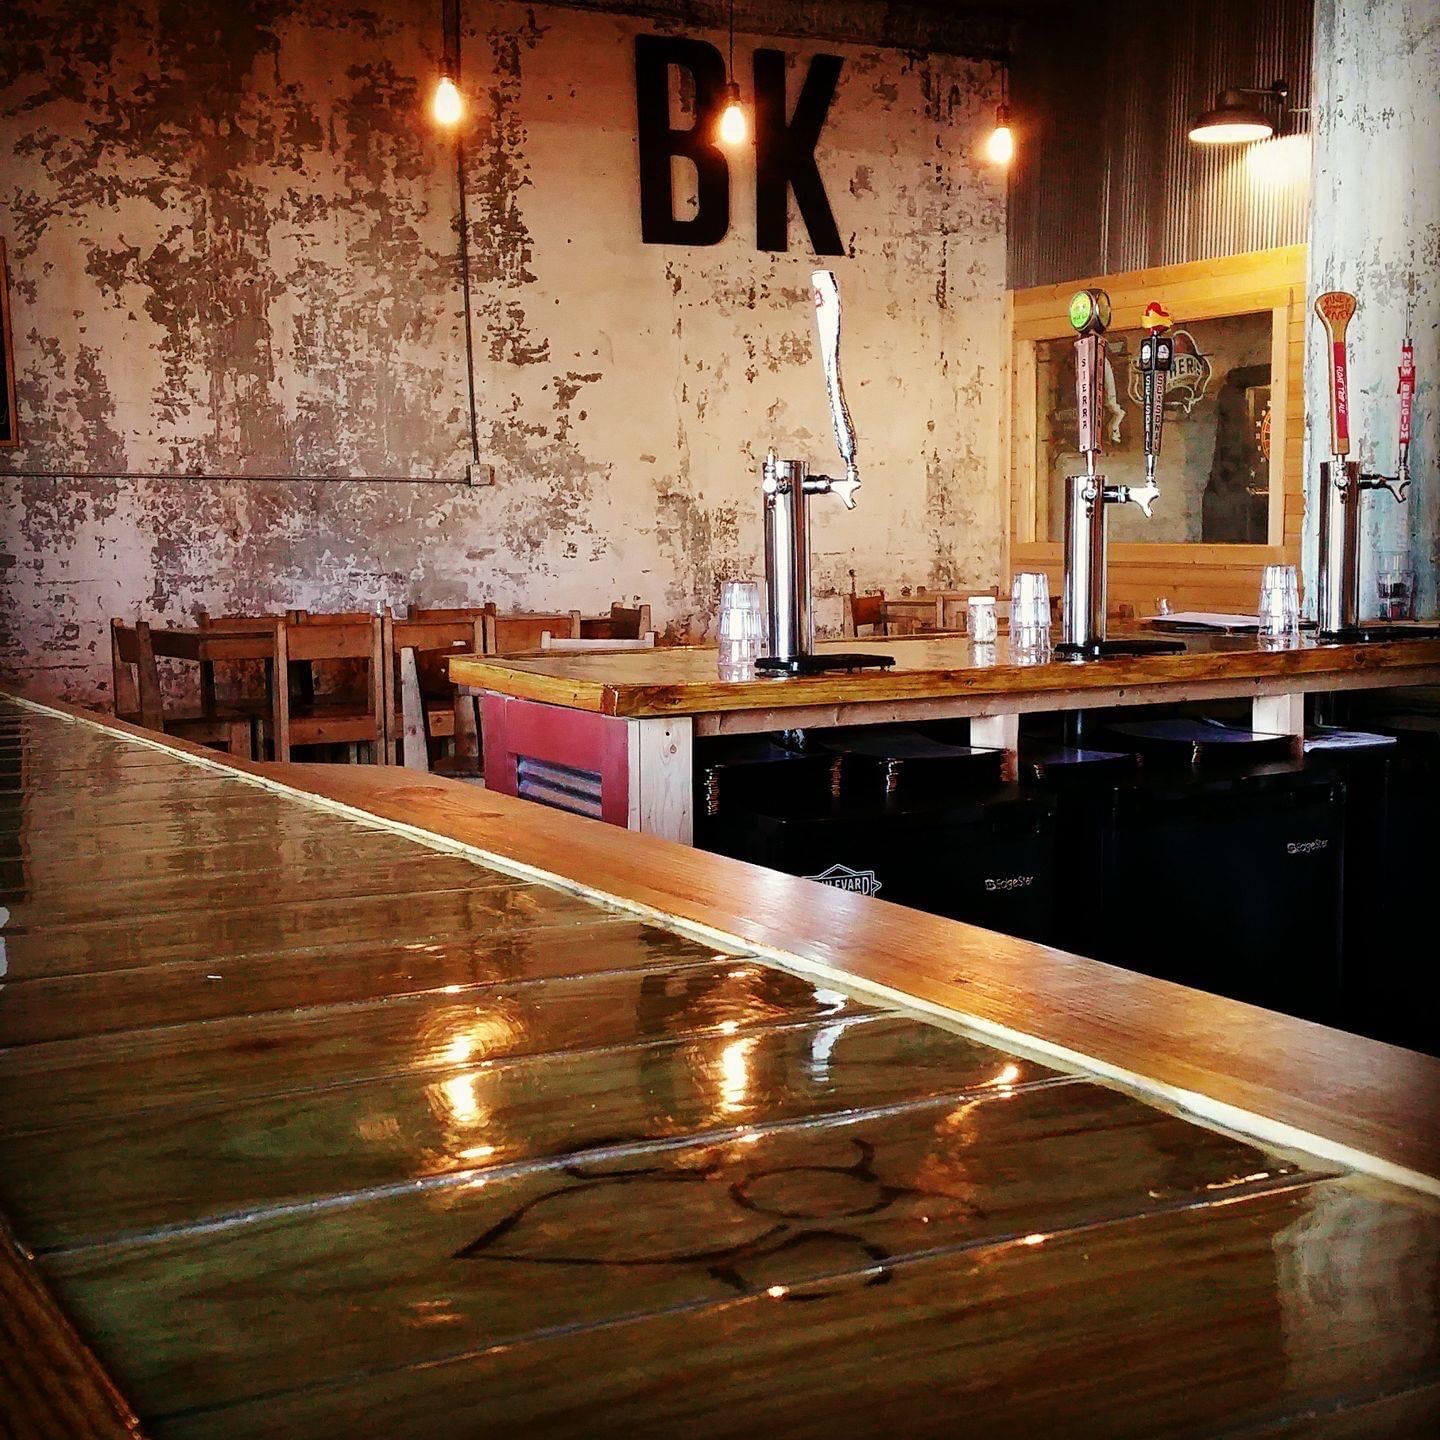 Bee’s Knees Brewing Company